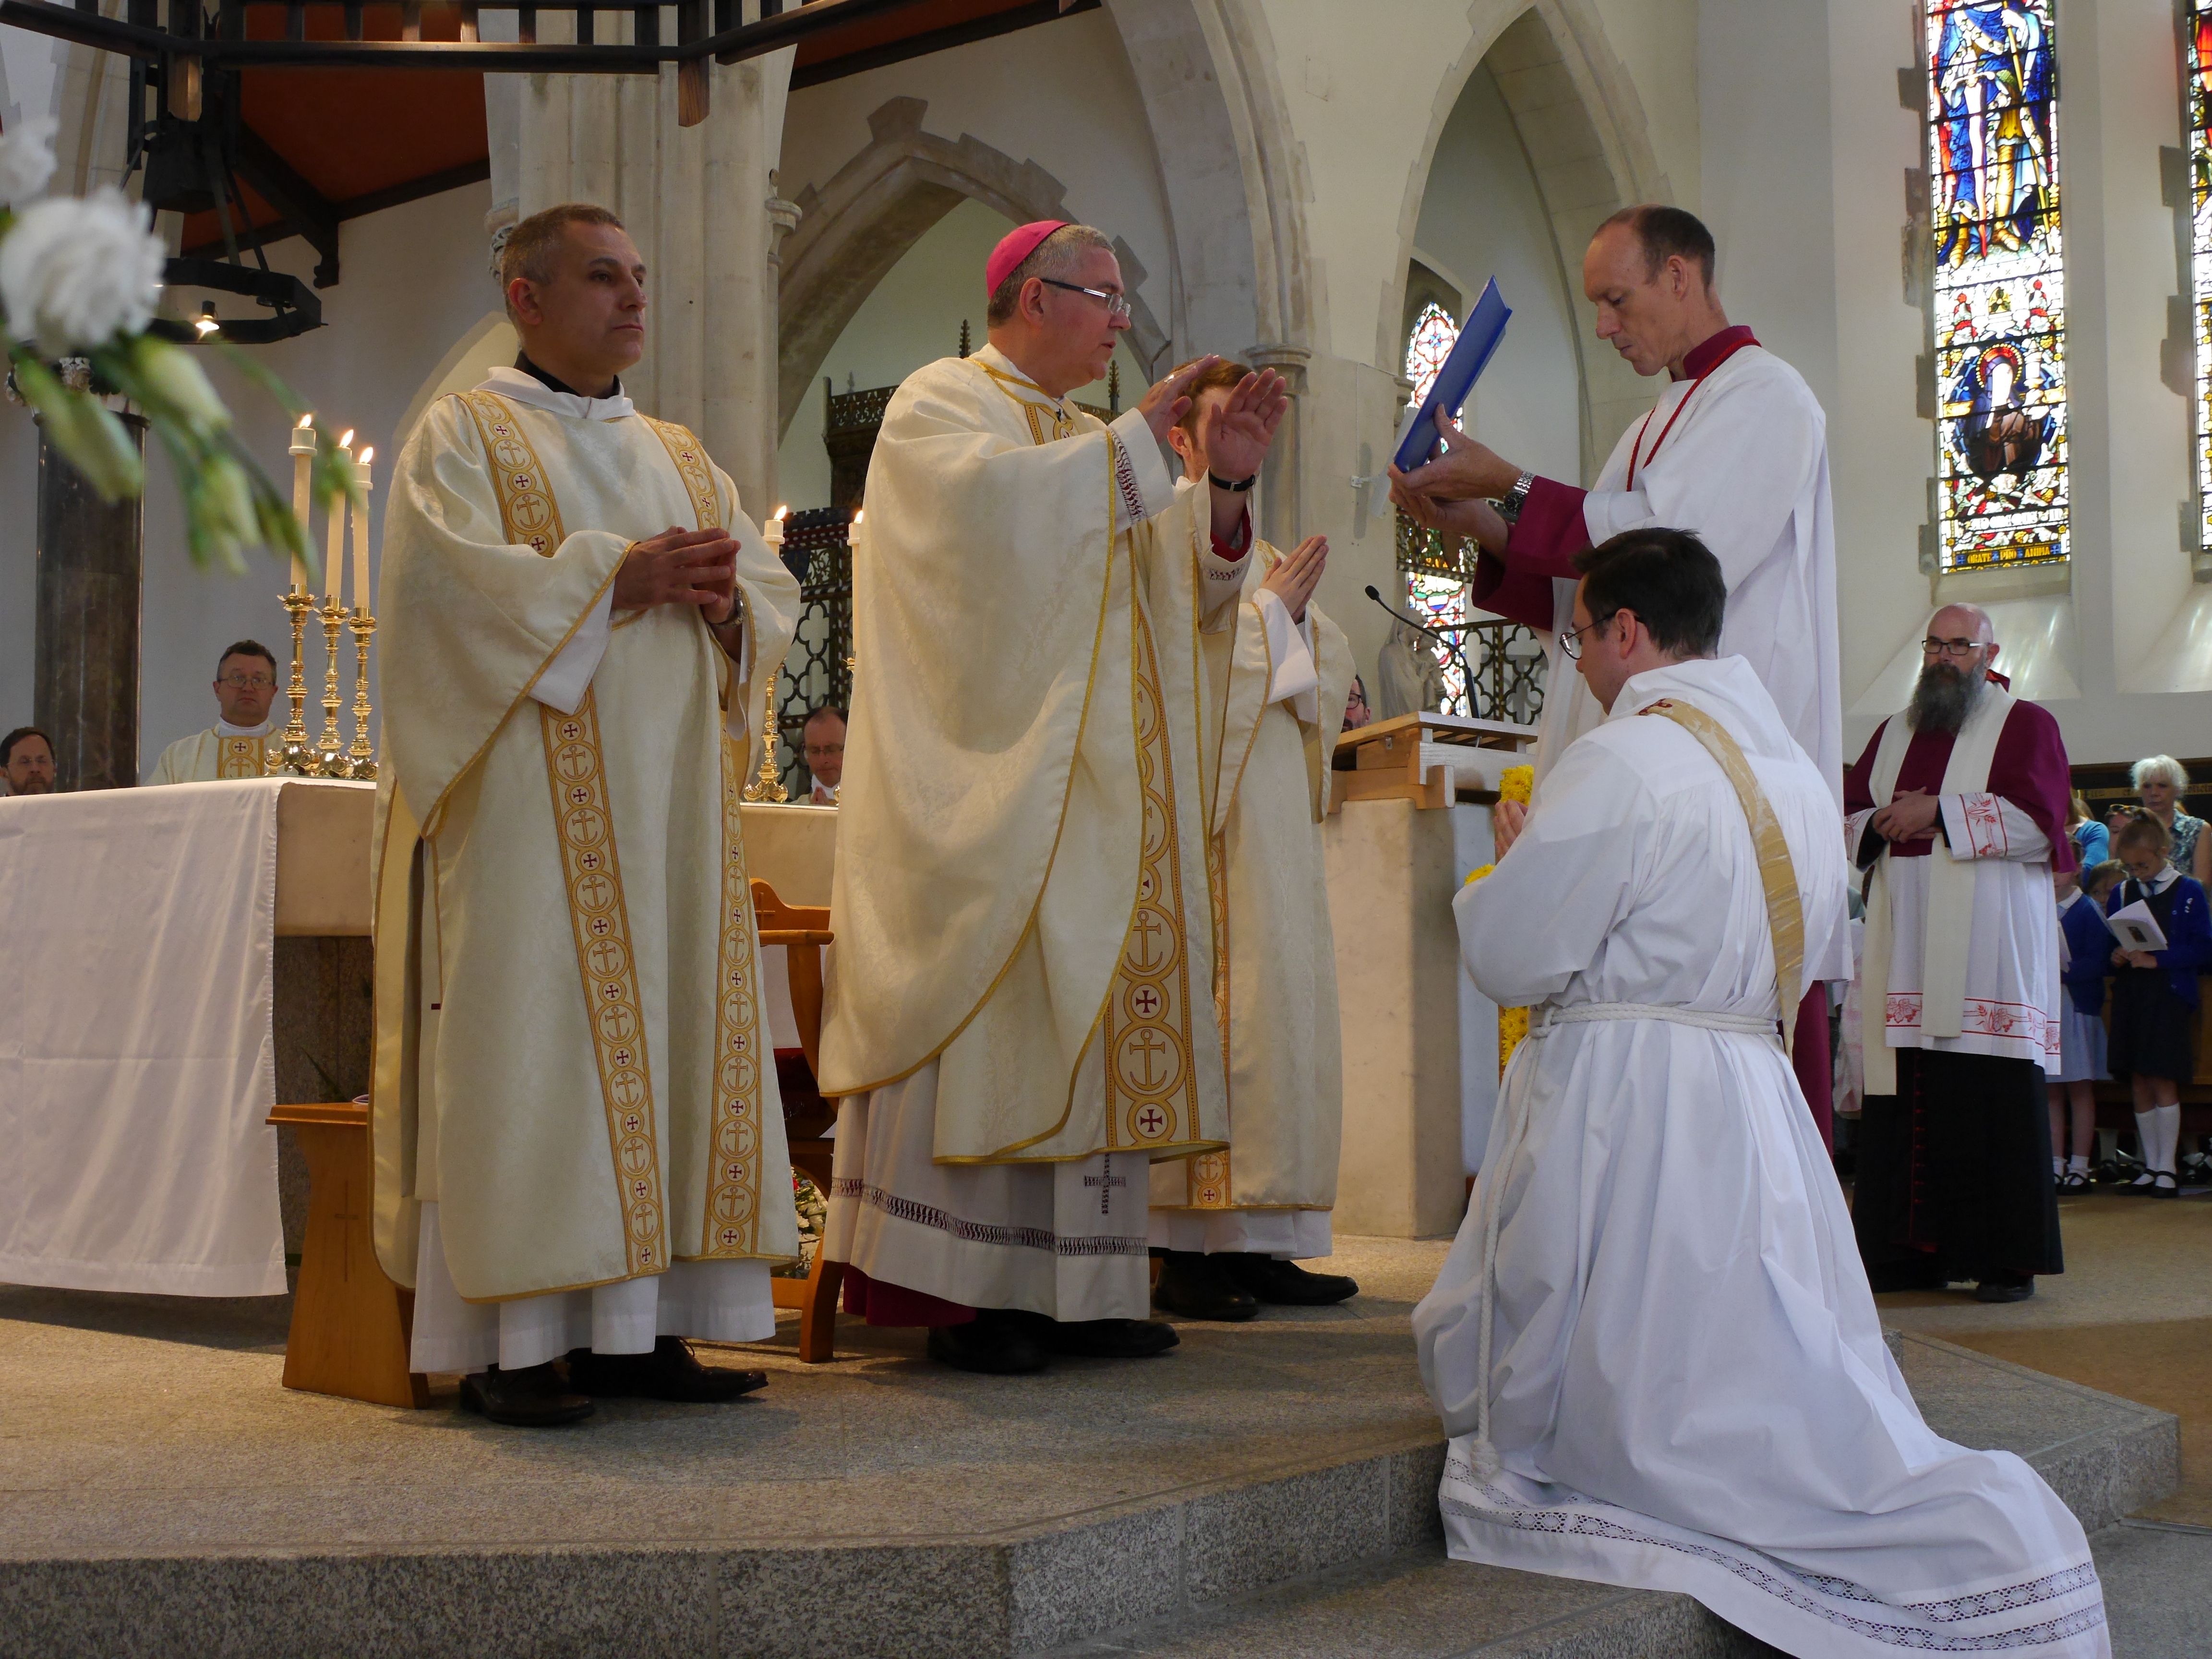 Deacon James first kneels before the bishop as he pledges his “Promise of Obedience.”